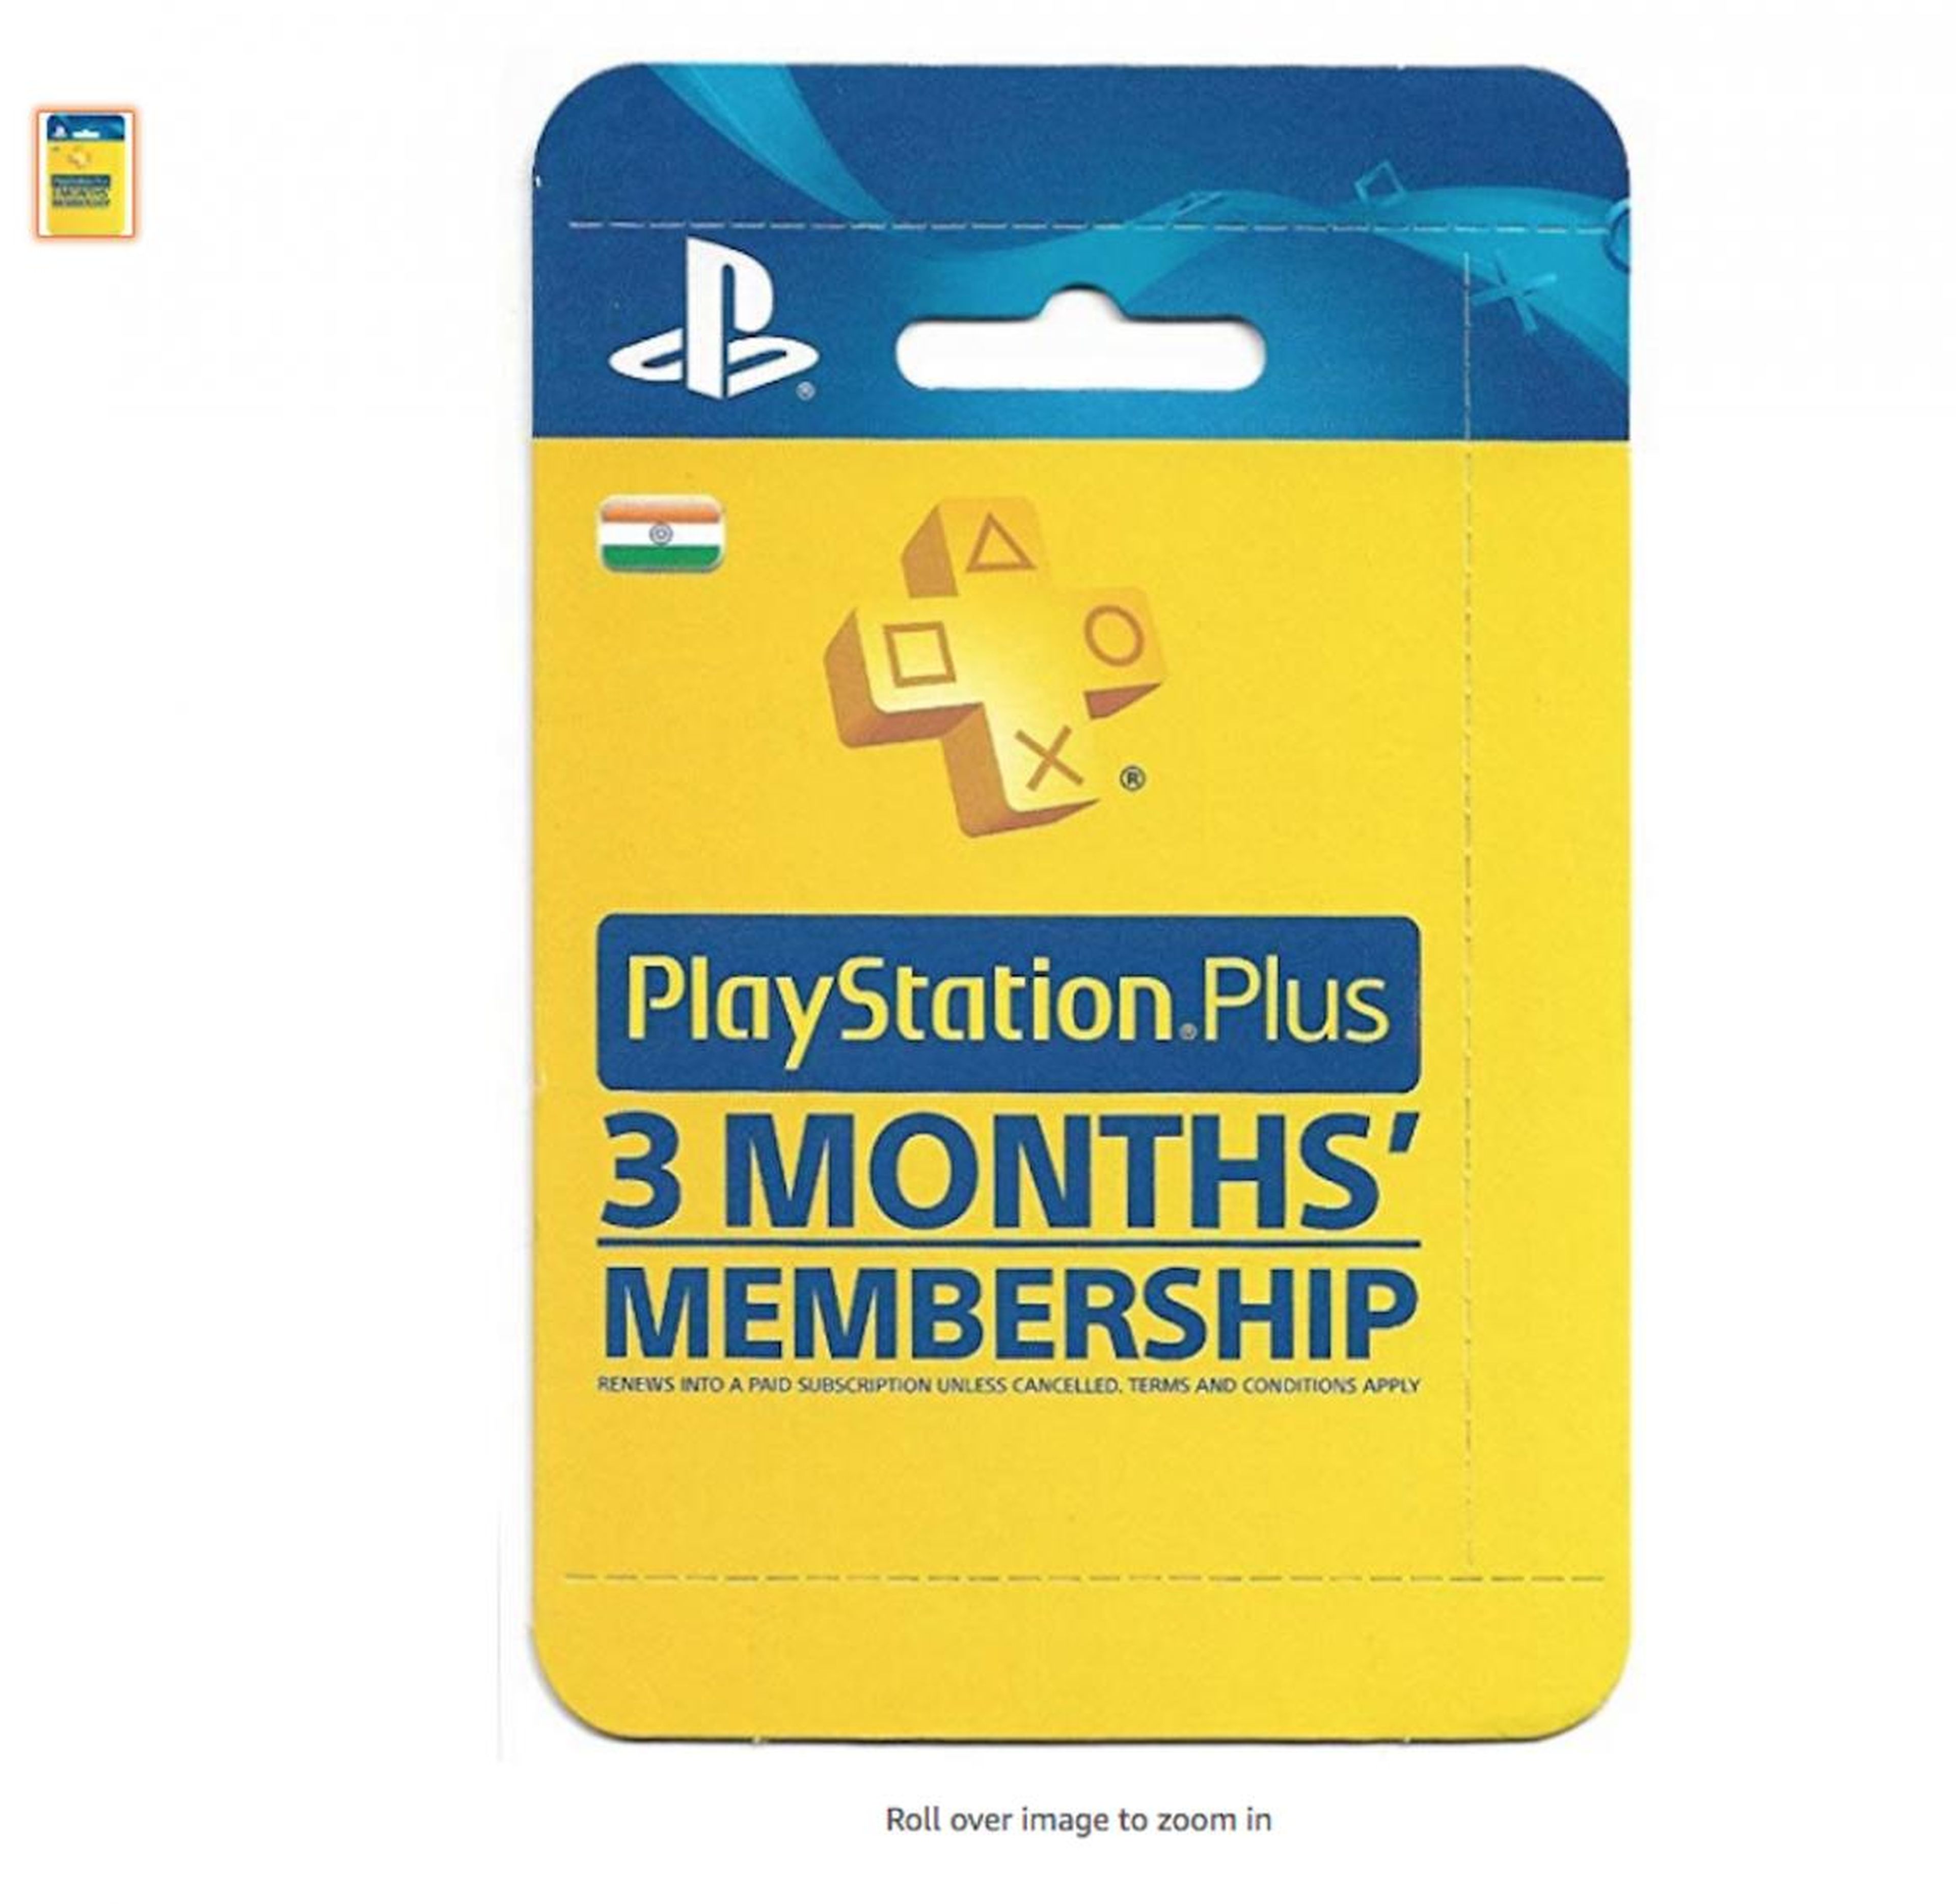 France: <a href="https://amzn.to/2uwPmqL">PlayStation Plus Memberships</a> were also a top seller in France.